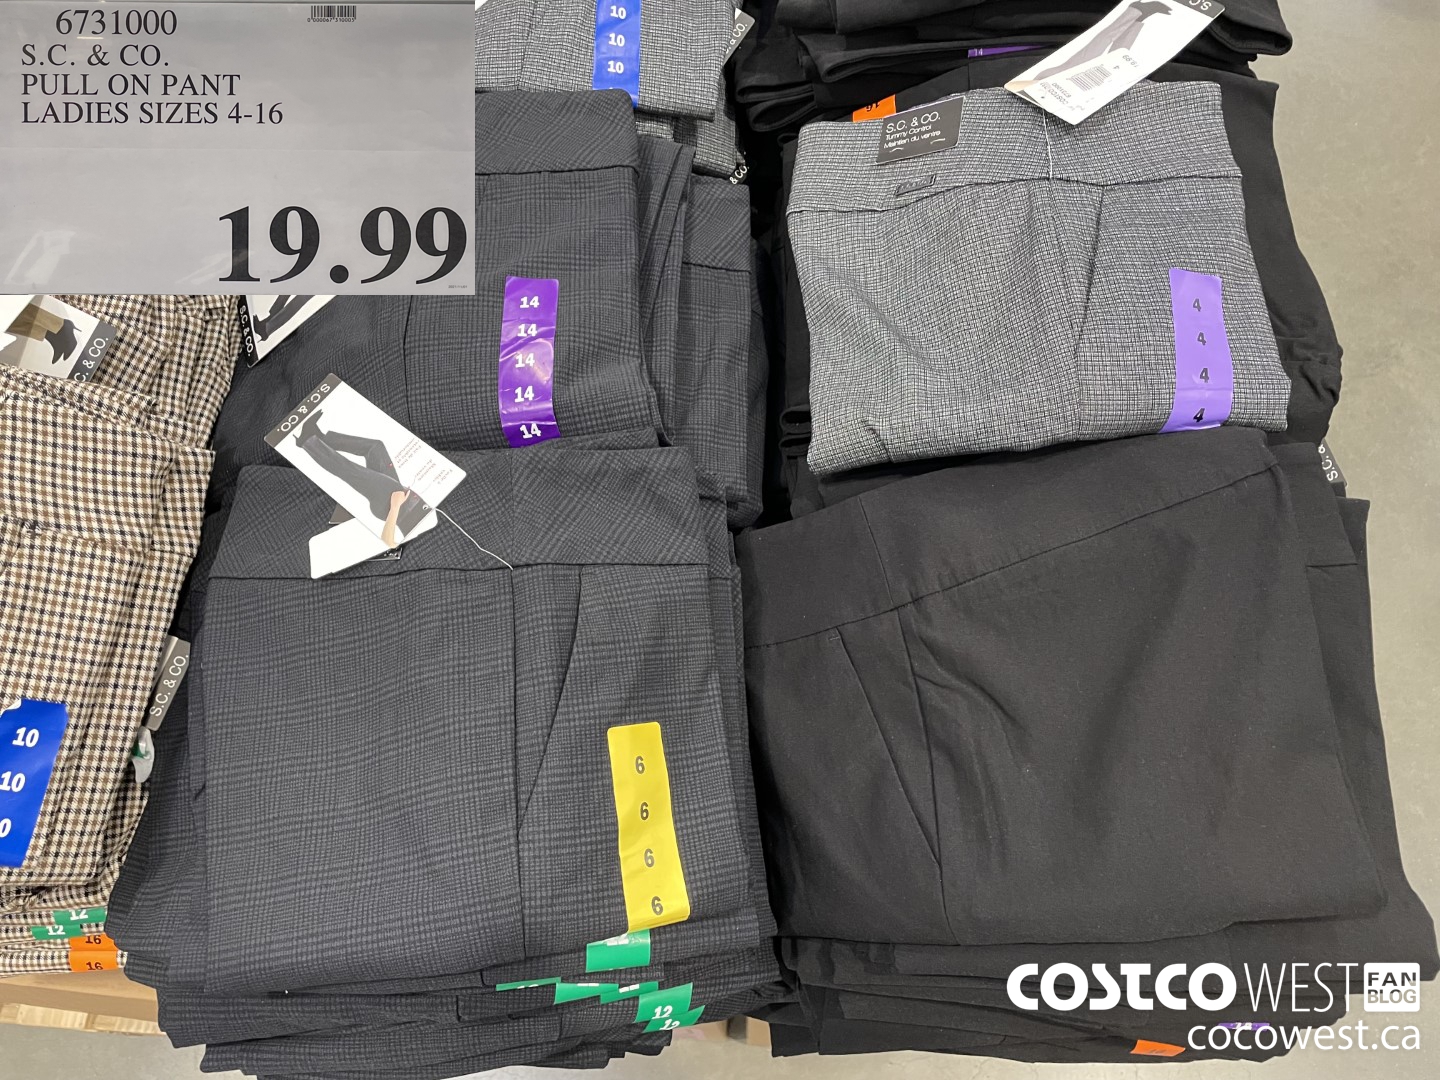 UP ! PULL ON PANT + LADIES SIZES 4-16 at Costco 3180 Laird Rd Mississauga